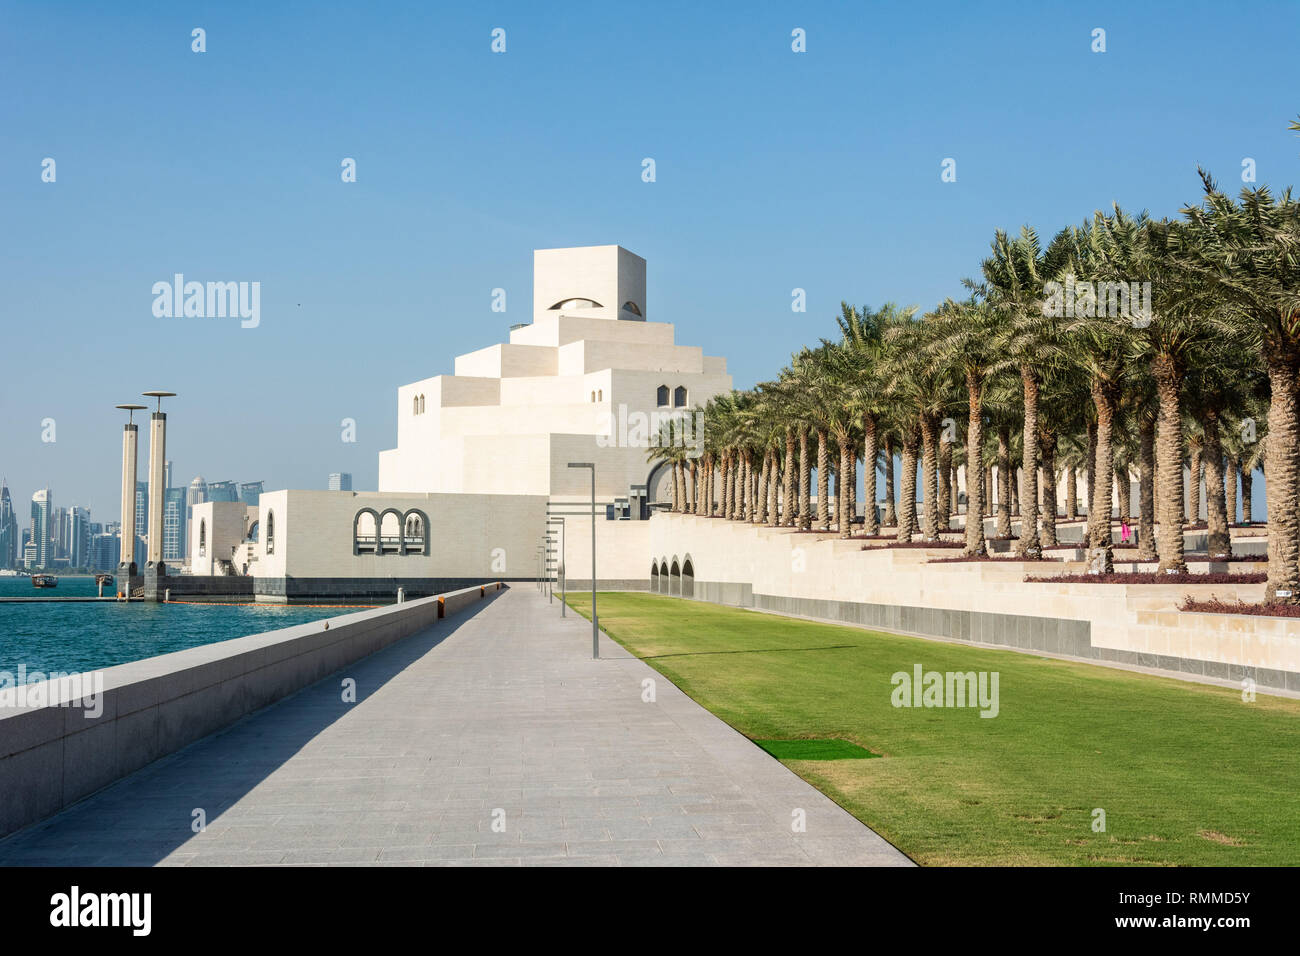 Doha, Qatar - November 9, 2016. Exterior view of the Museum of Islamic Art in Doha, with palm trees. Stock Photo